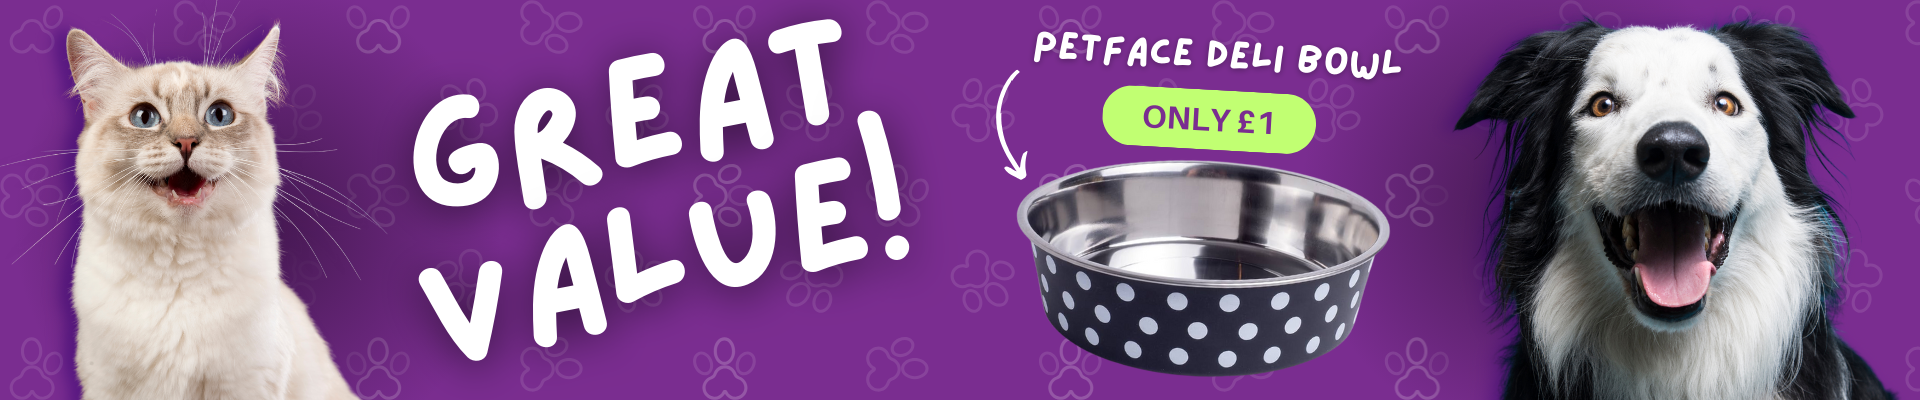 Peface dog bowl great value £1